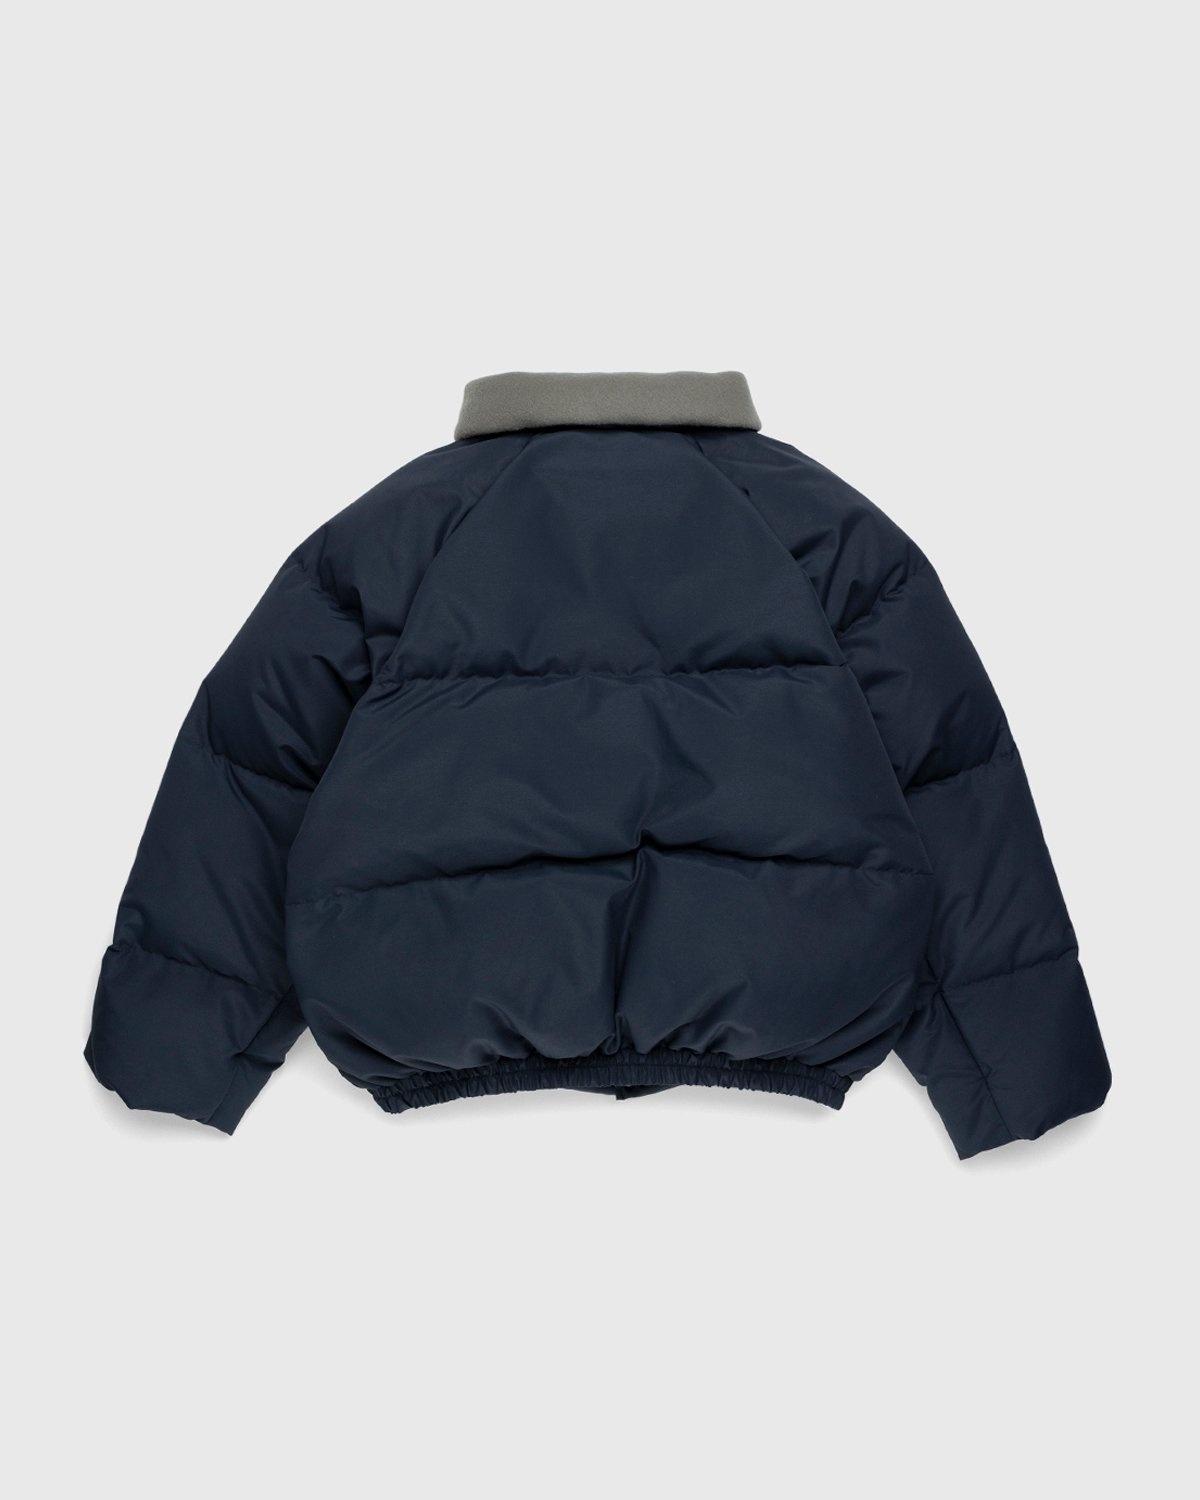 Acne Studios – Down Puffer Jacket Charcoal Grey - Outerwear - Grey - Image 3